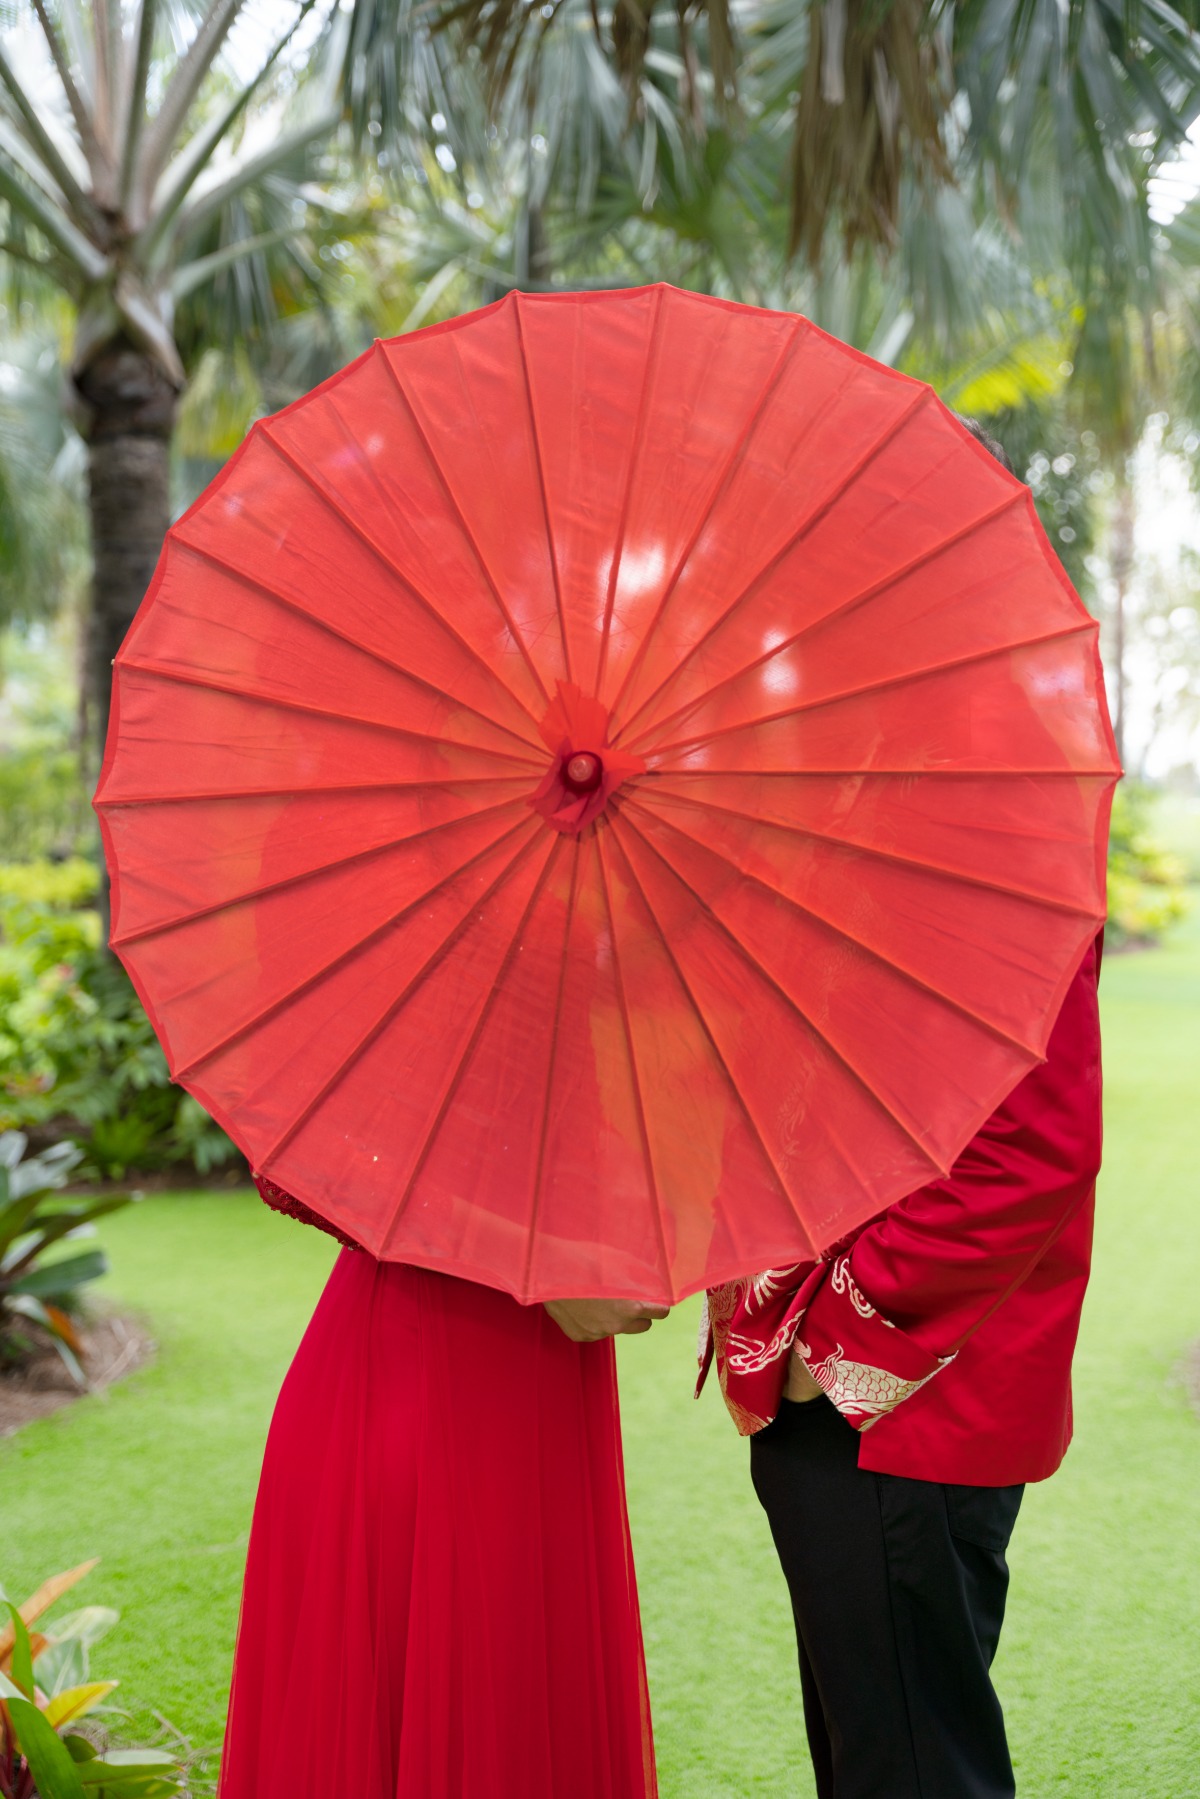 Incorporating Asian details into the wedding